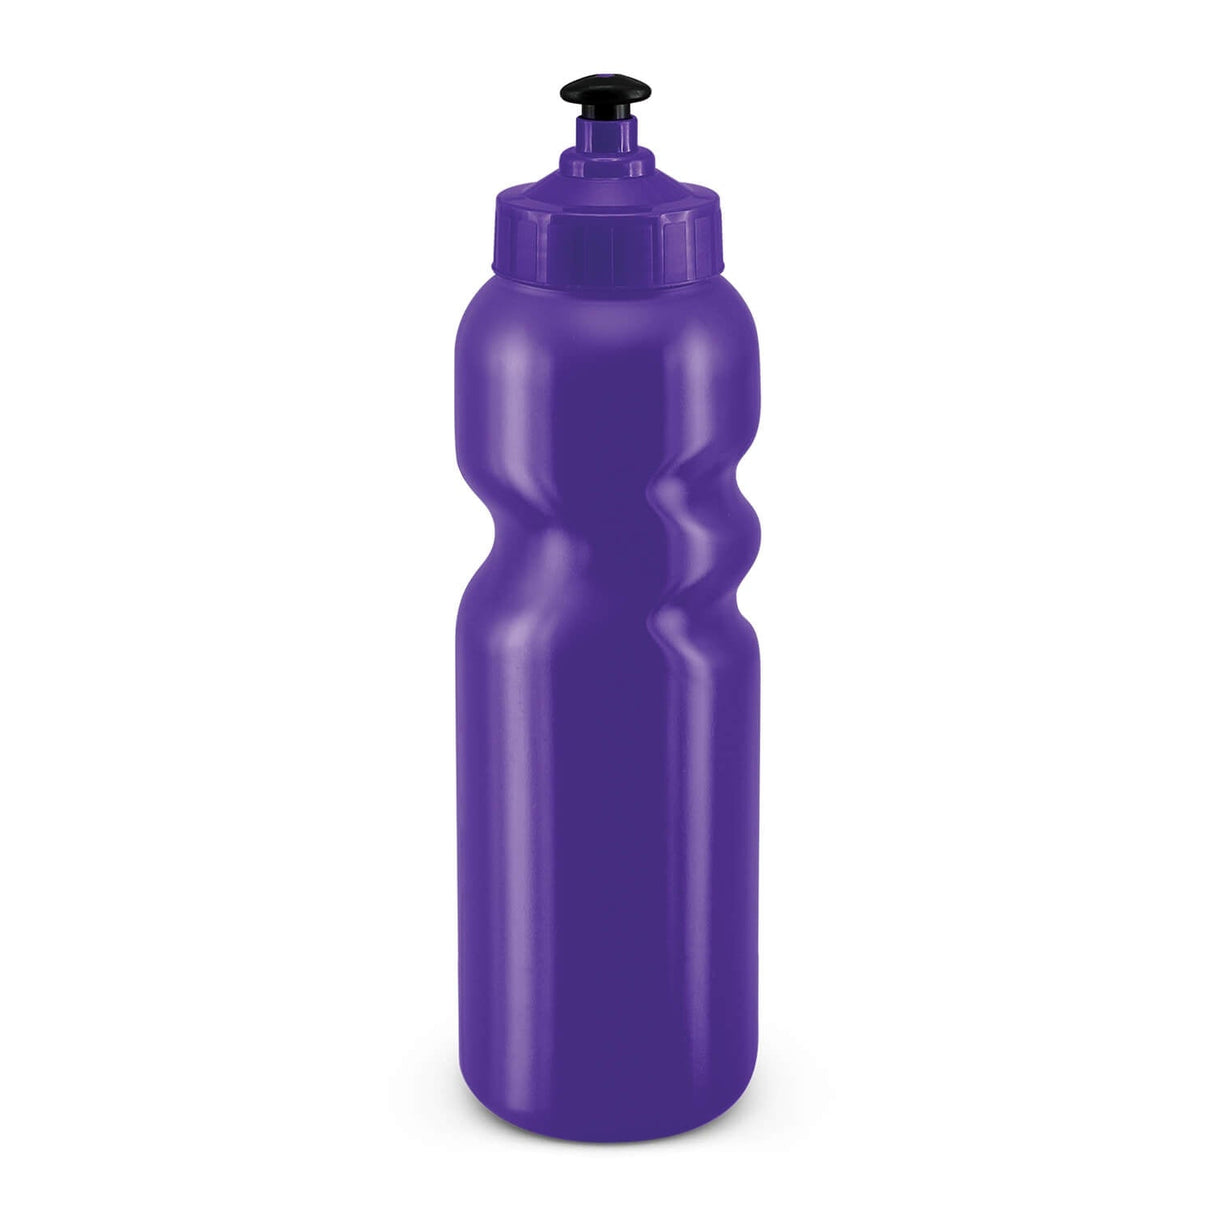 Action Sipper Bottle 500ml - Printed